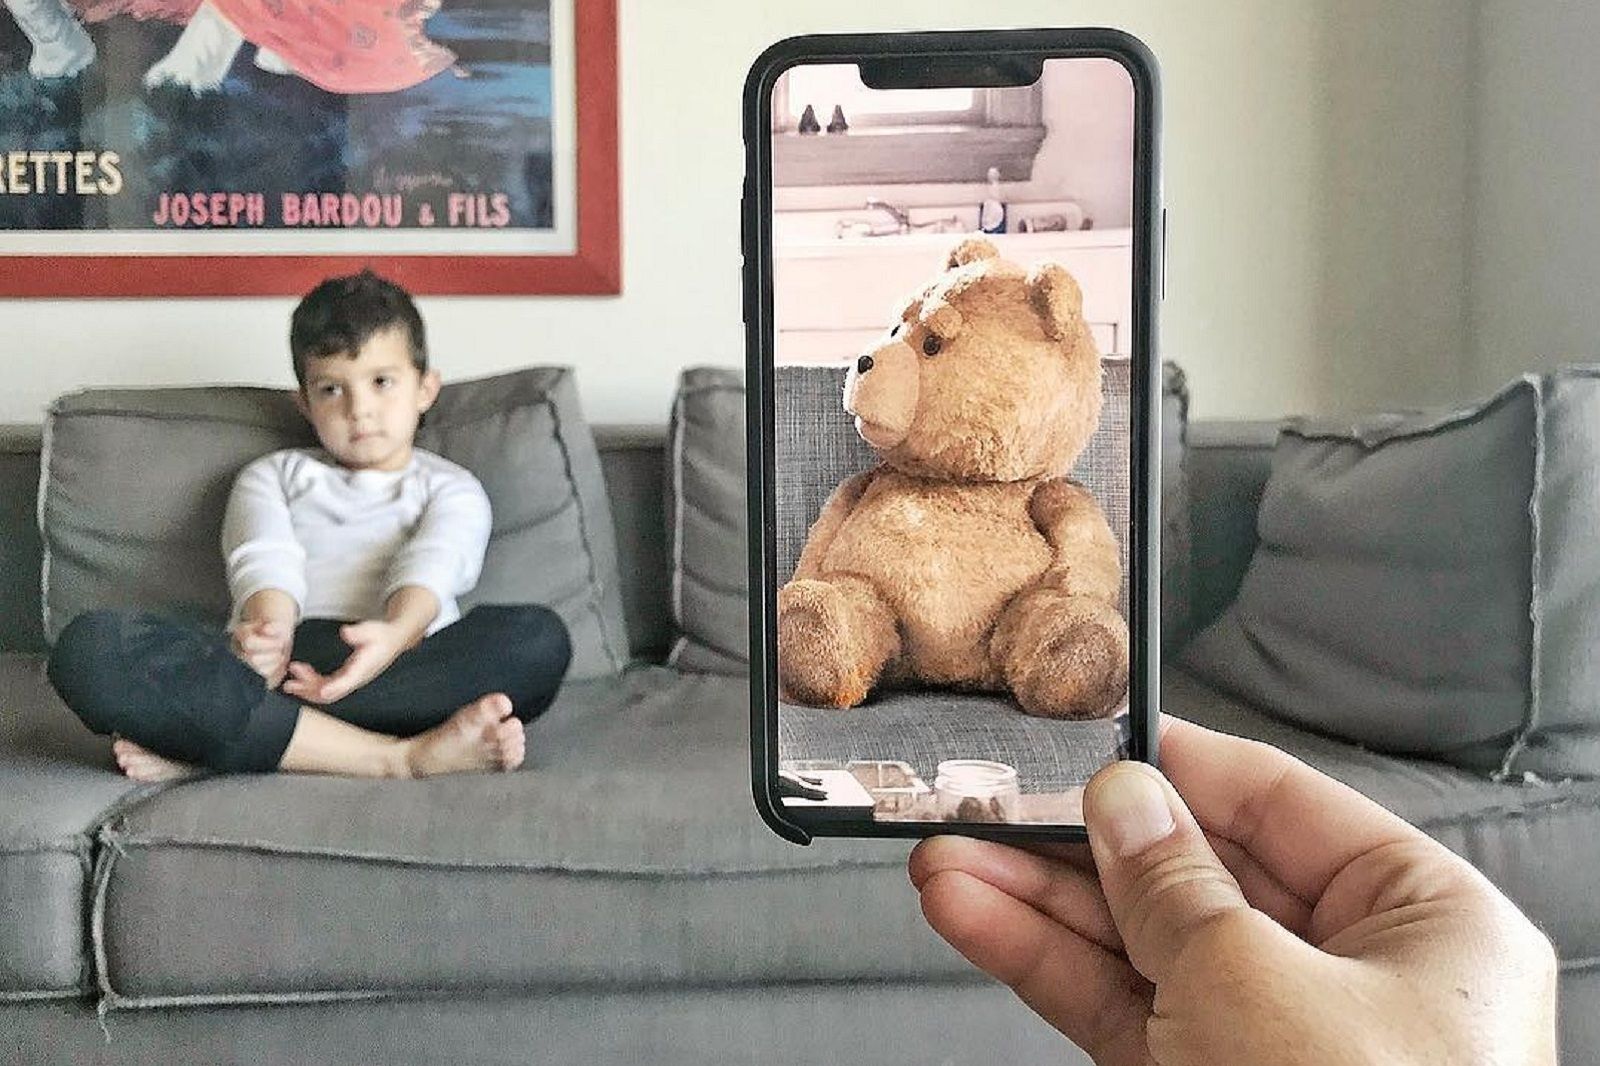 It's all about perspective with these smartphone photos